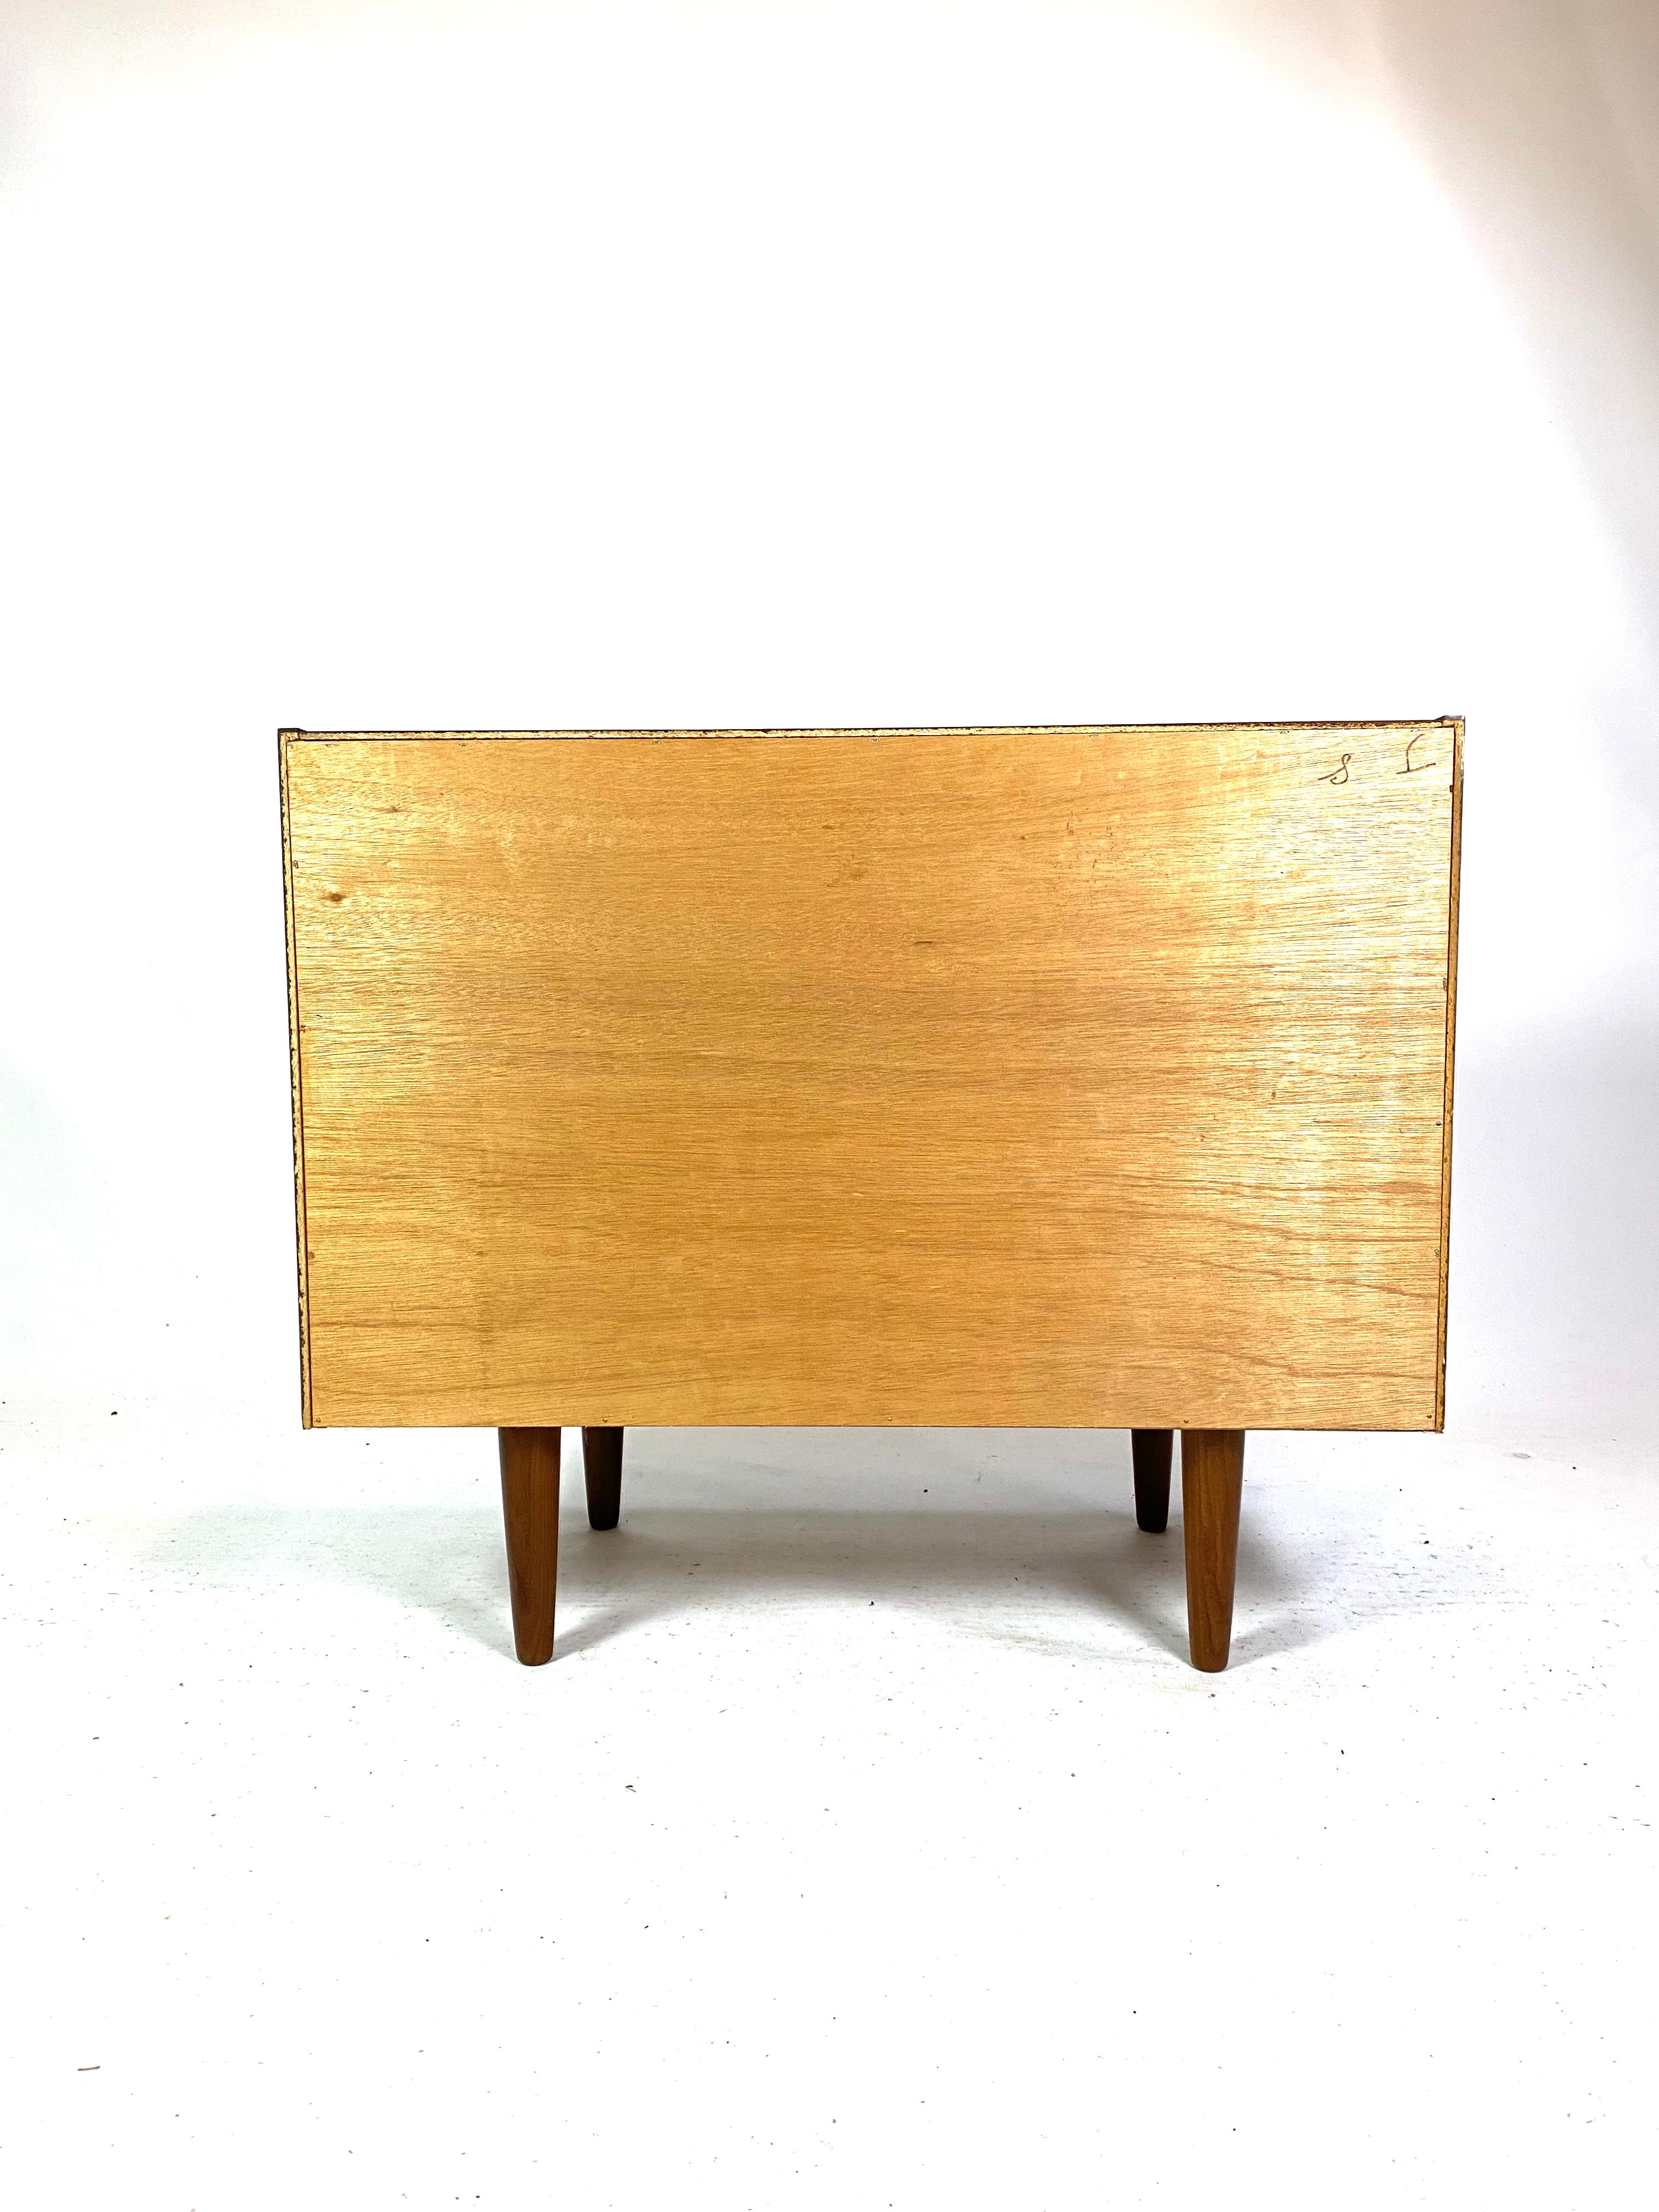 Get a piece of furniture history with this elegant rosewood chest of drawers from the 1960s. The rosewood gives the commode a warm and natural glow, while at the same time emphasizing the fine craftsmanship that was typical of furniture design at